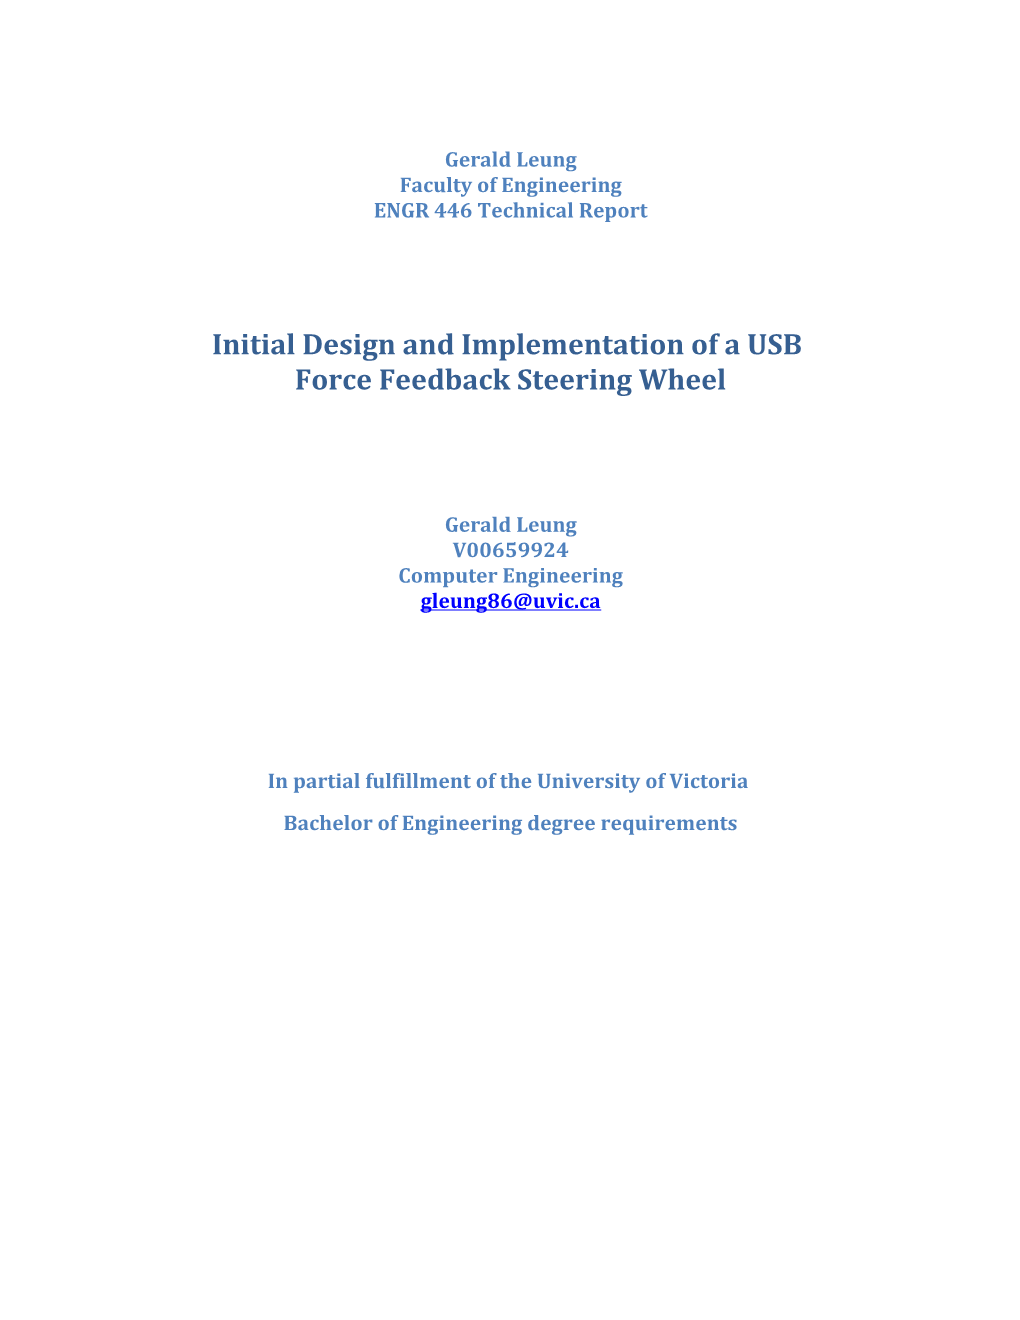 Initial Design and Implementation of a USB